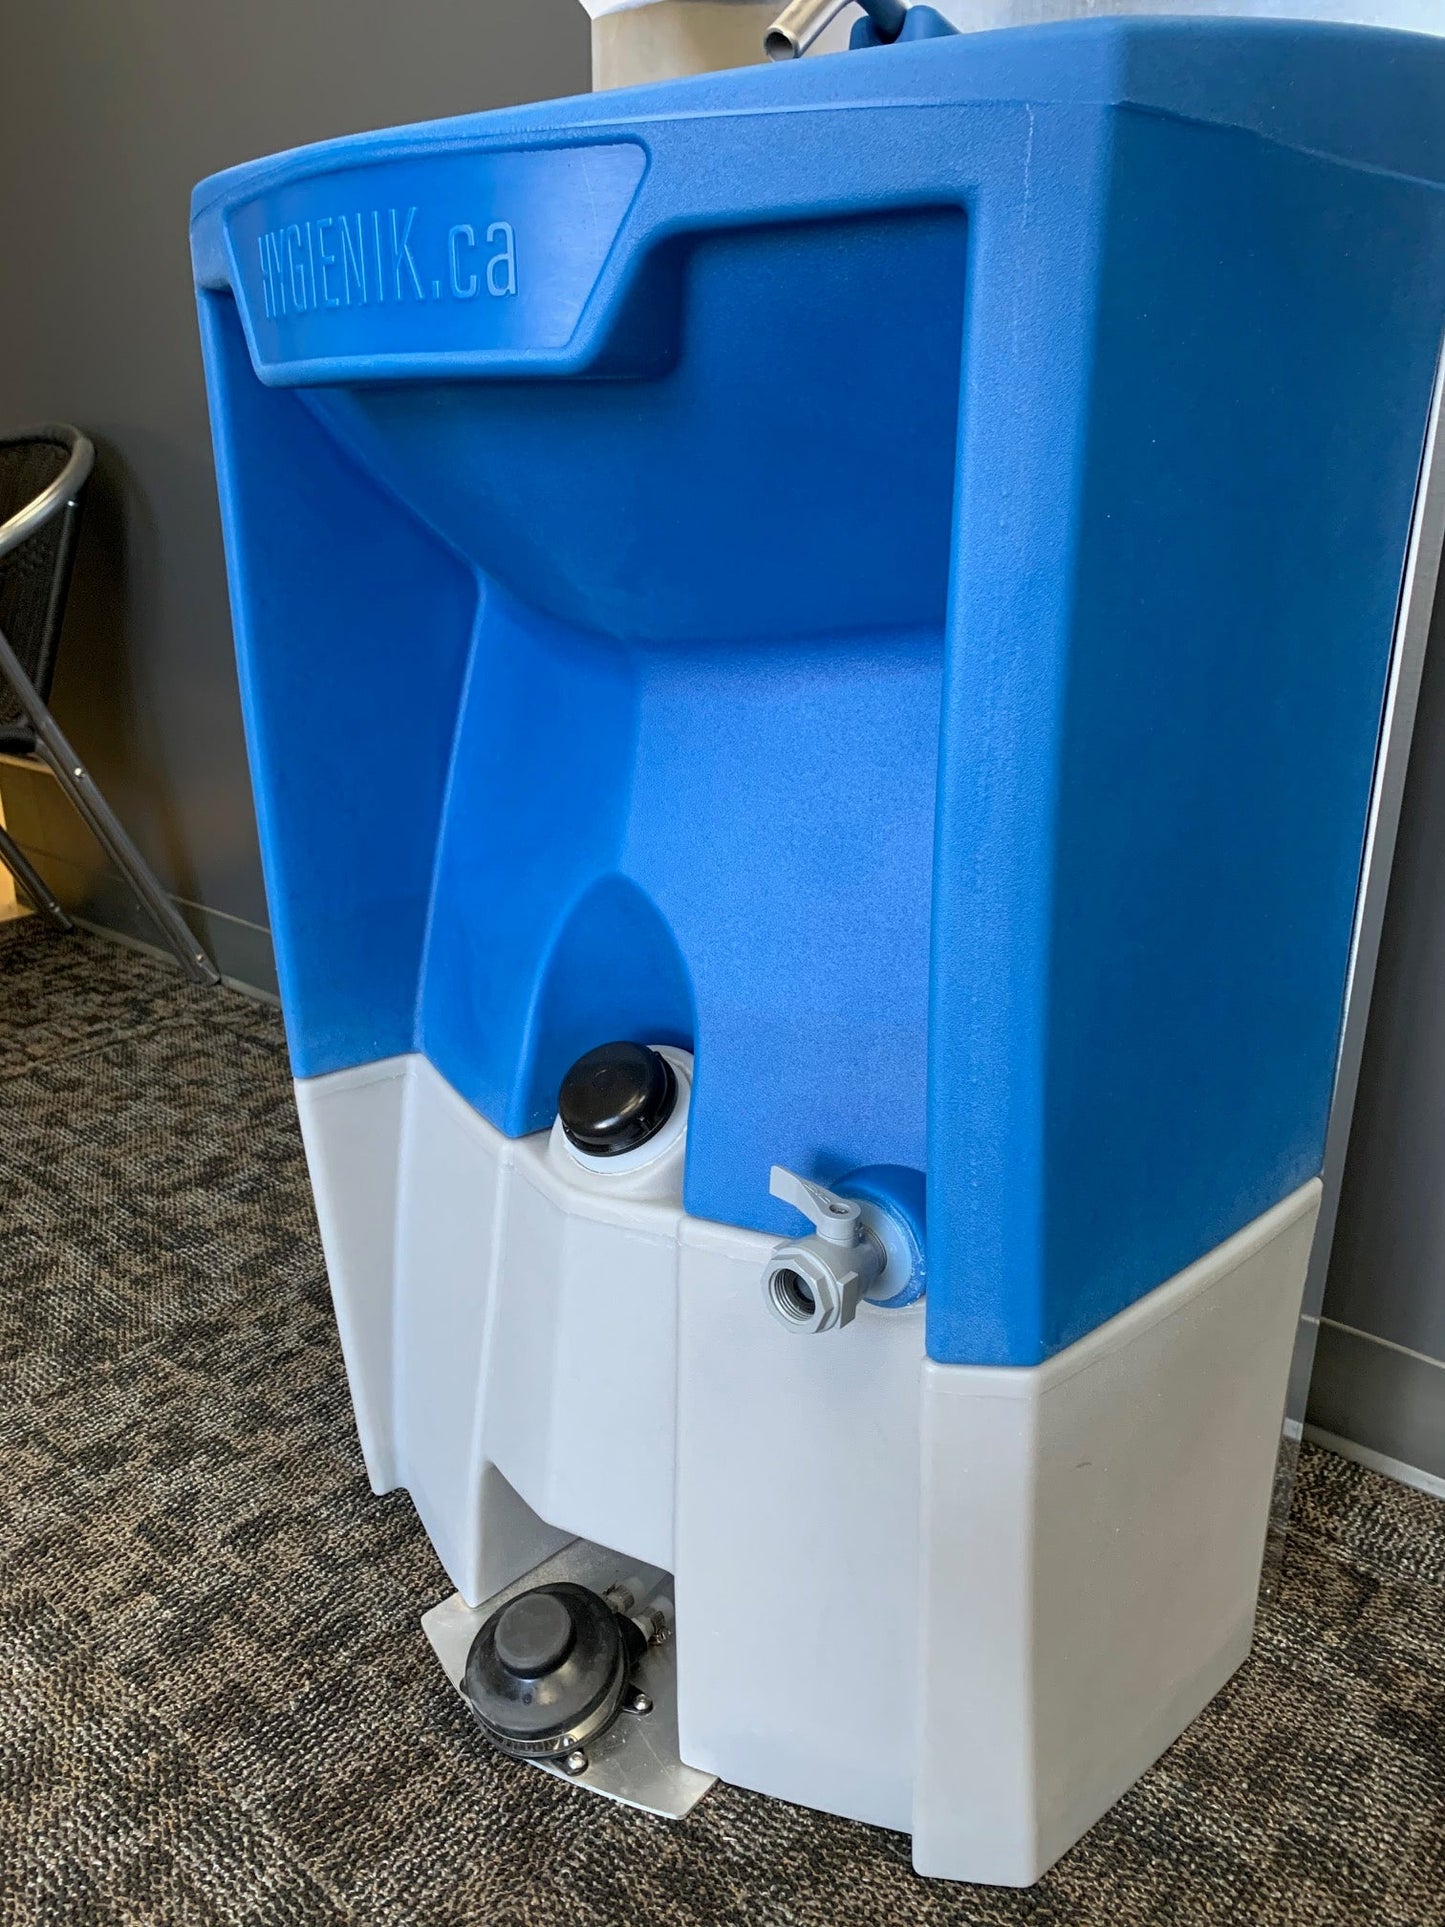 Hygienik portable hand washing station - Made in Canada (Quebec)